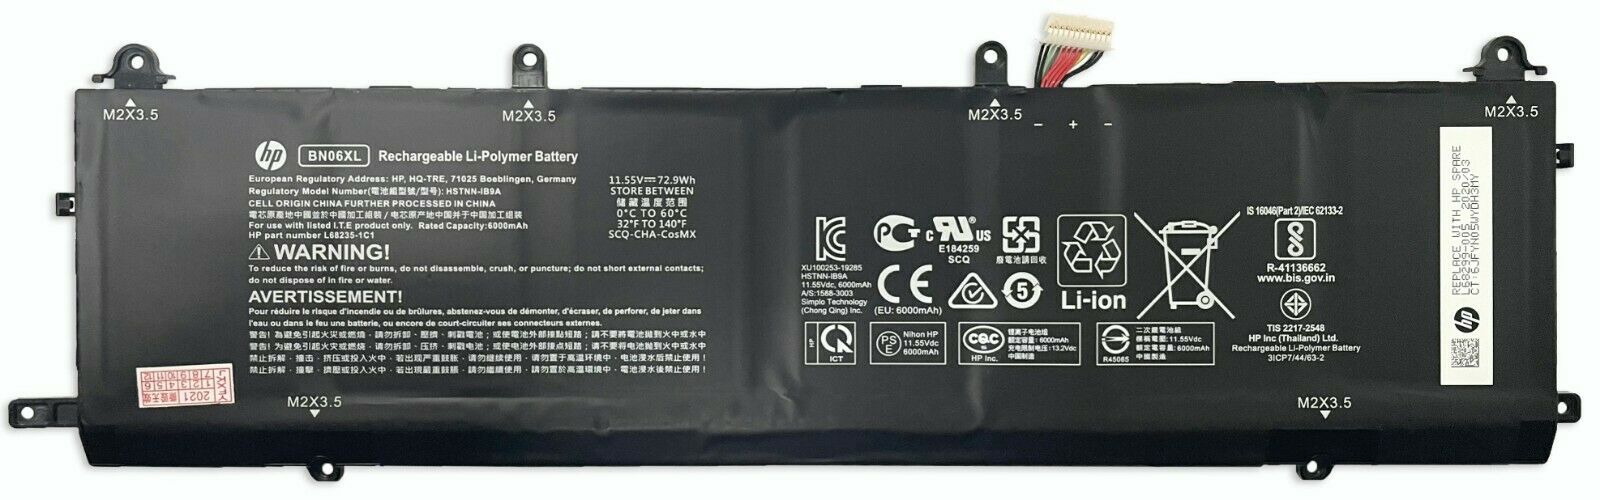 HP Spectre x360 15-eb0047tx Battery 6-cell 72.9Wh